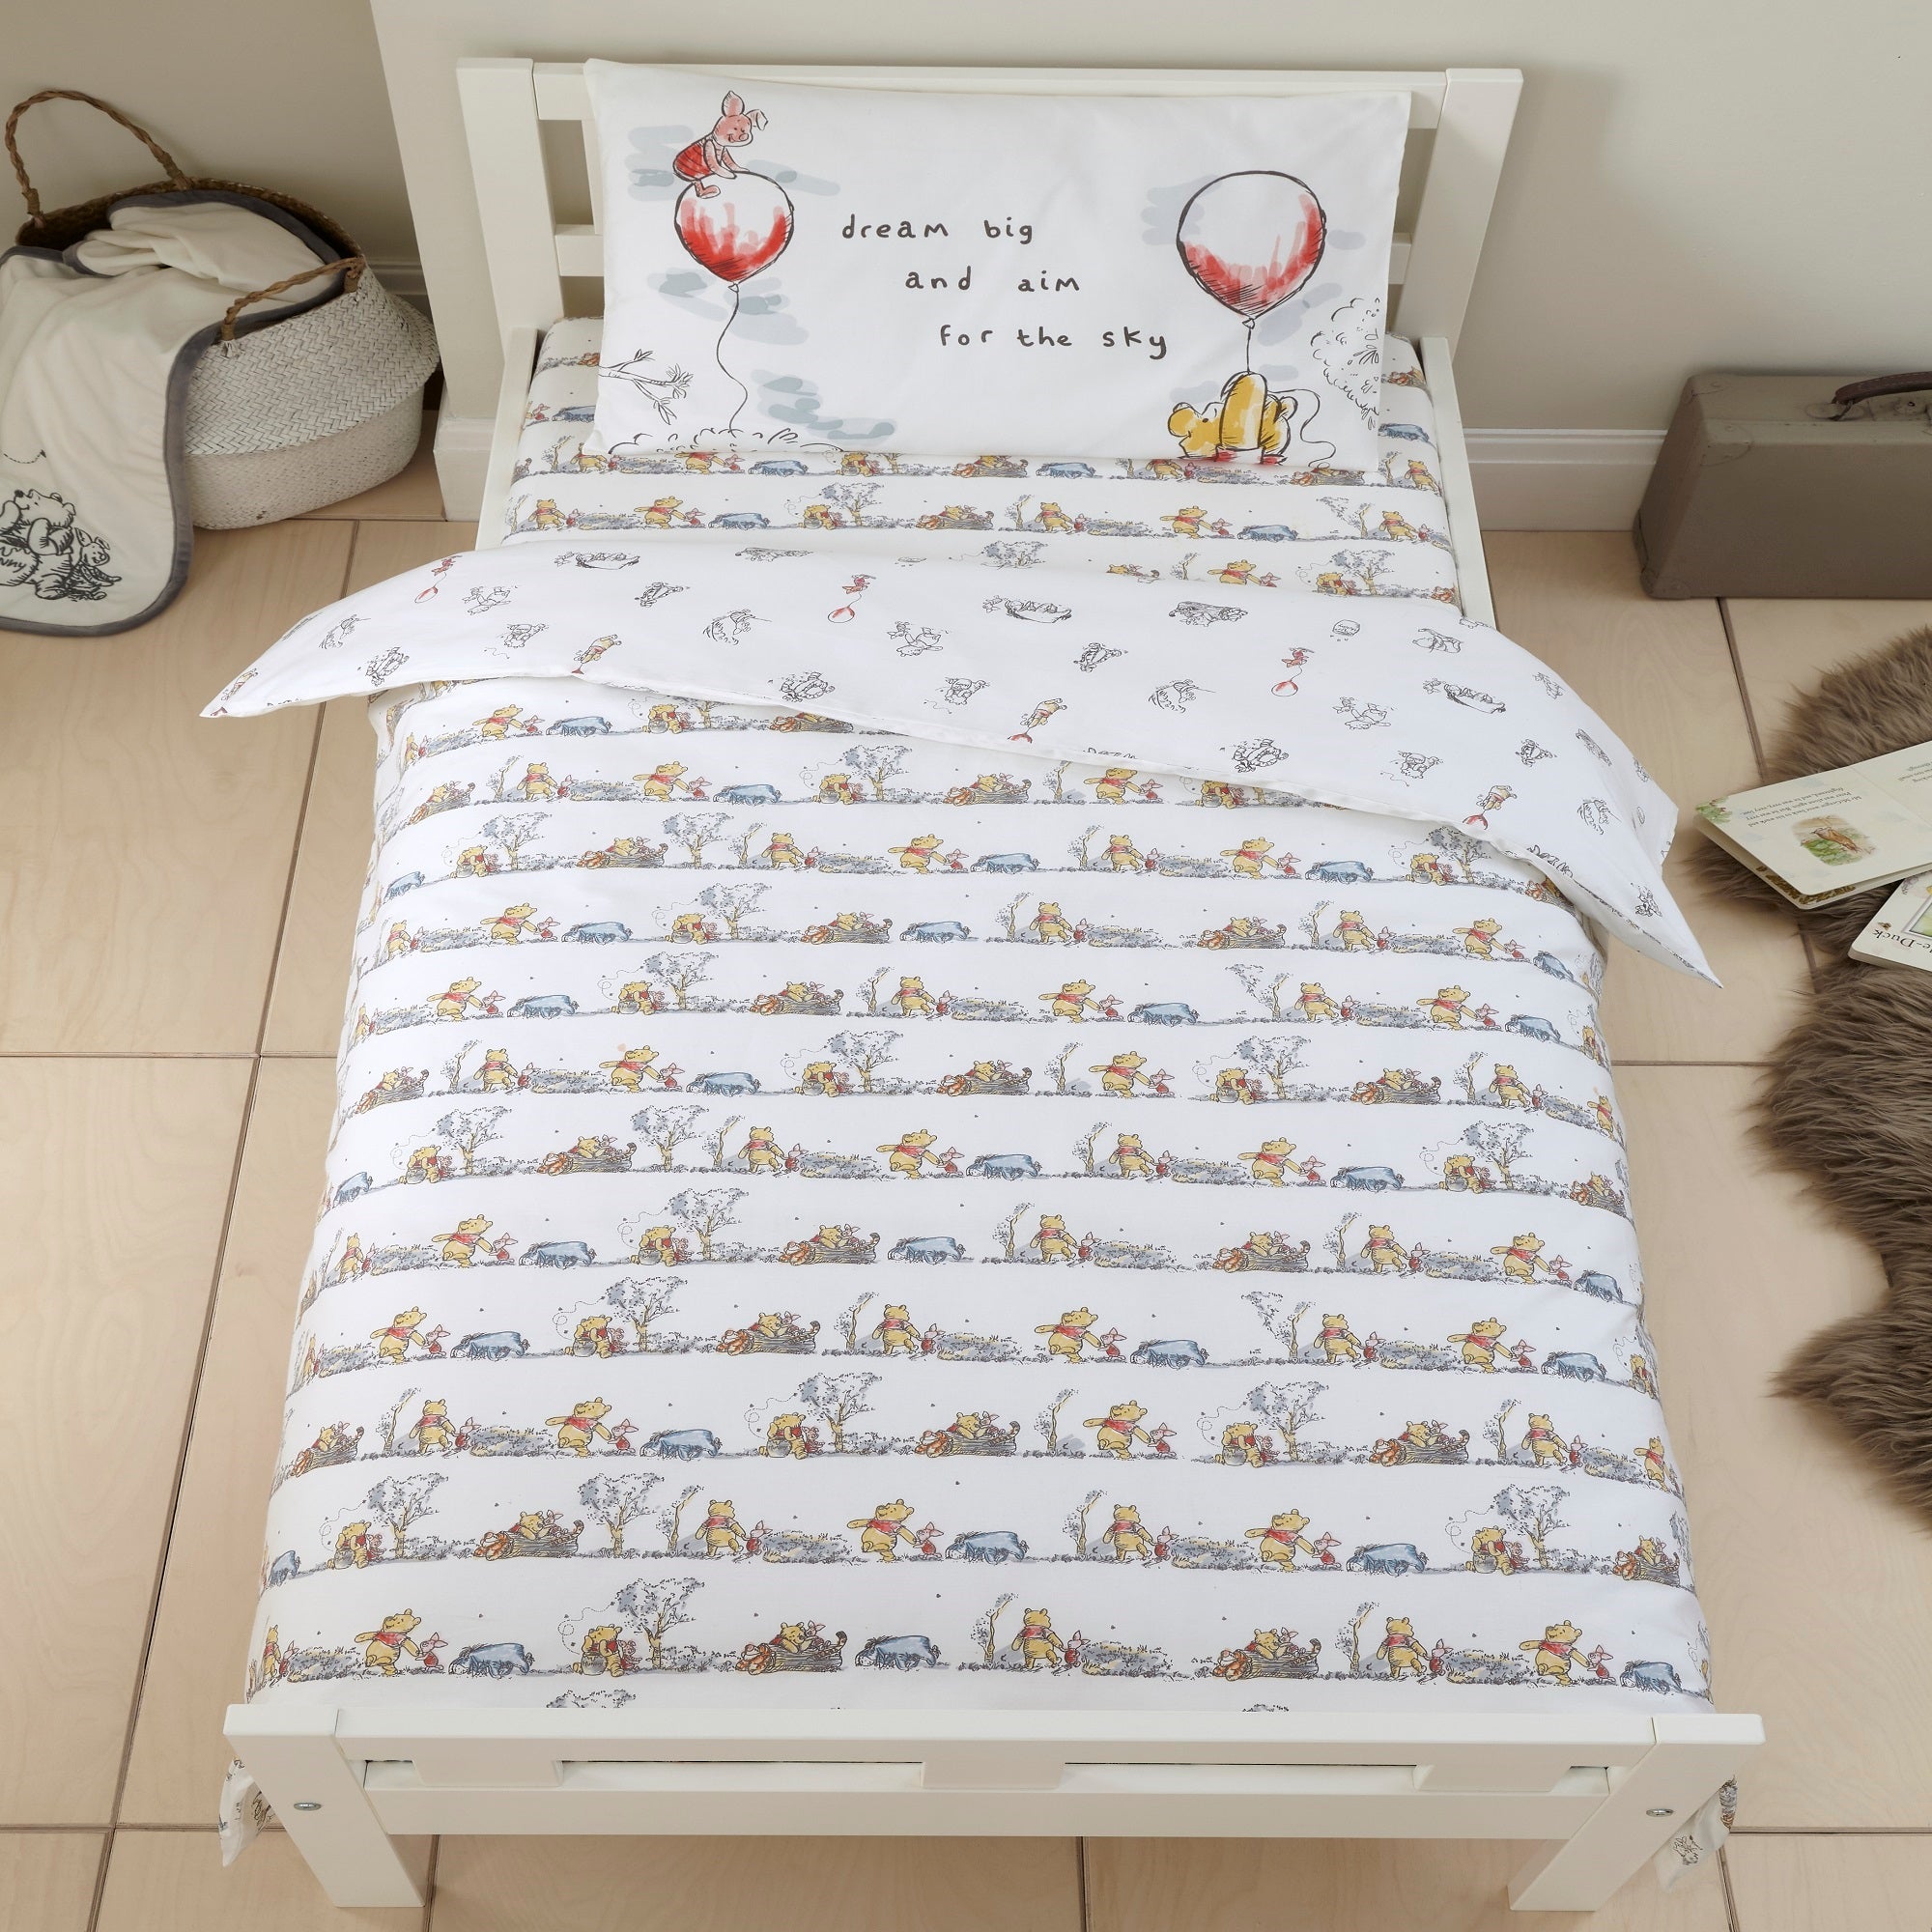 Disney Winnie the Pooh Cot Bed Duvet Cover and Pillowcase Set